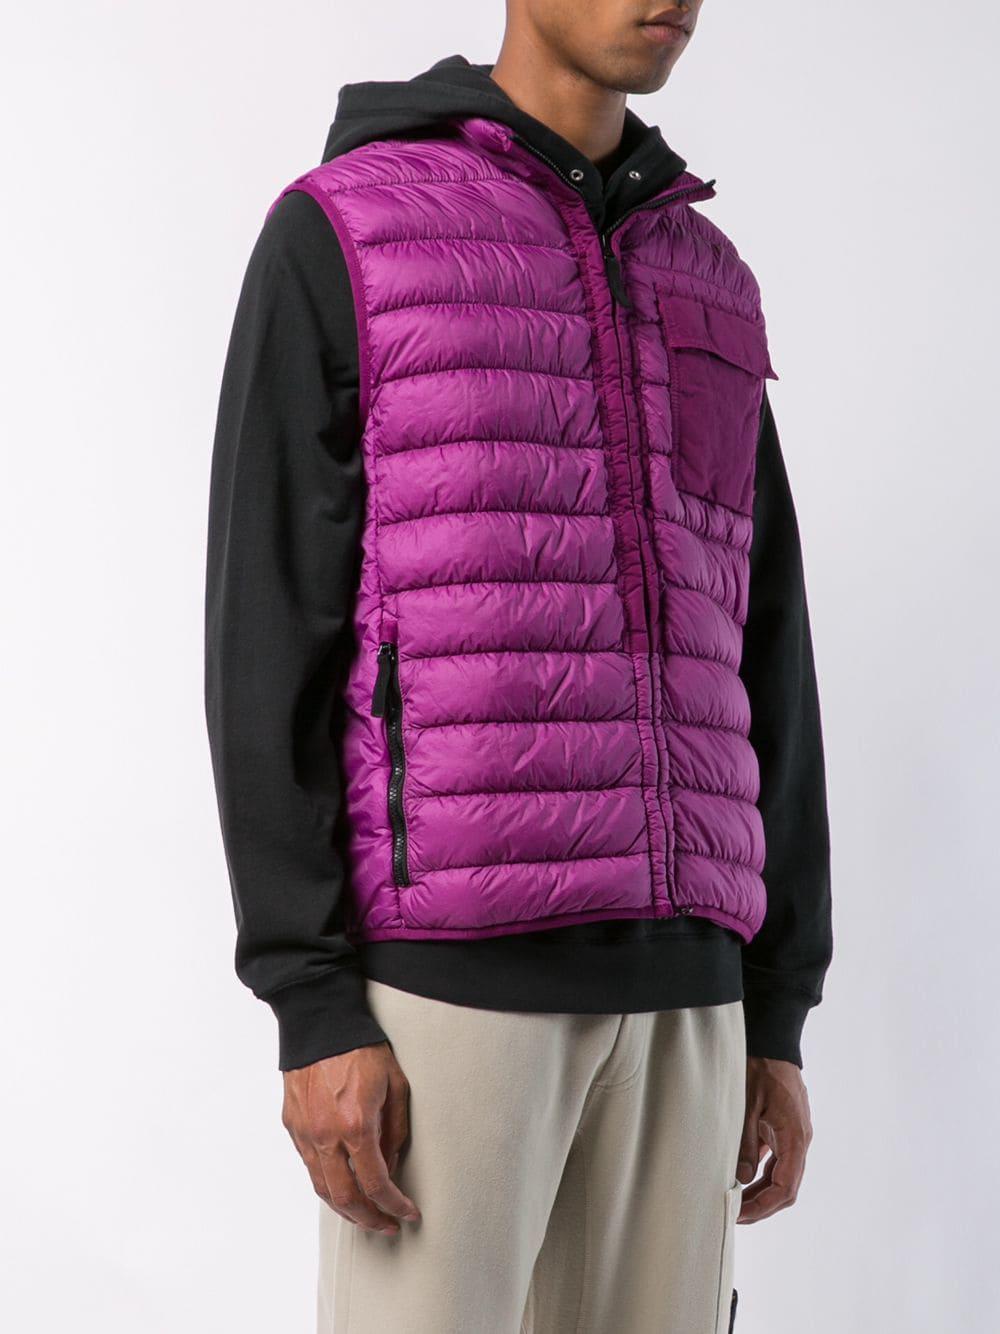 Stone Island Garment Dyed Micro Yarn Down Packable Gilet for Men - Lyst